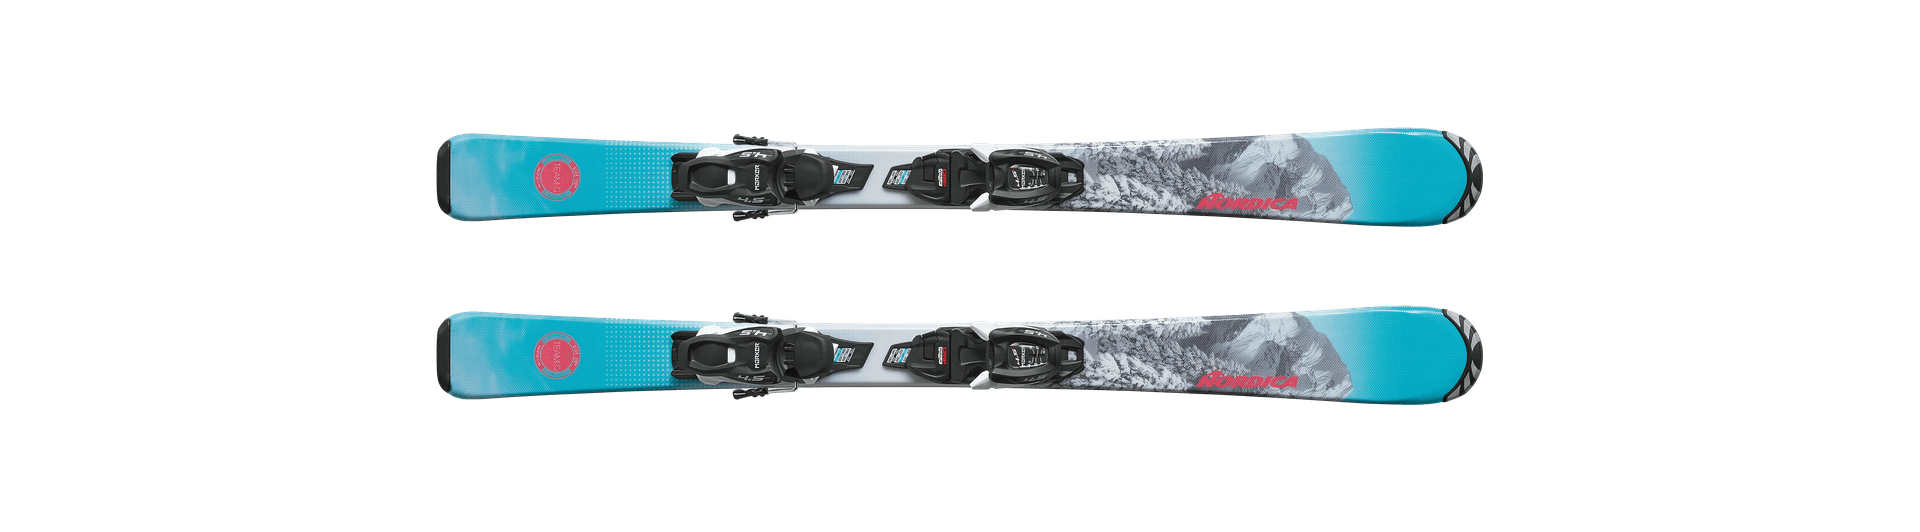 Picture of the Nordica Team g fdt (100-140) skis.